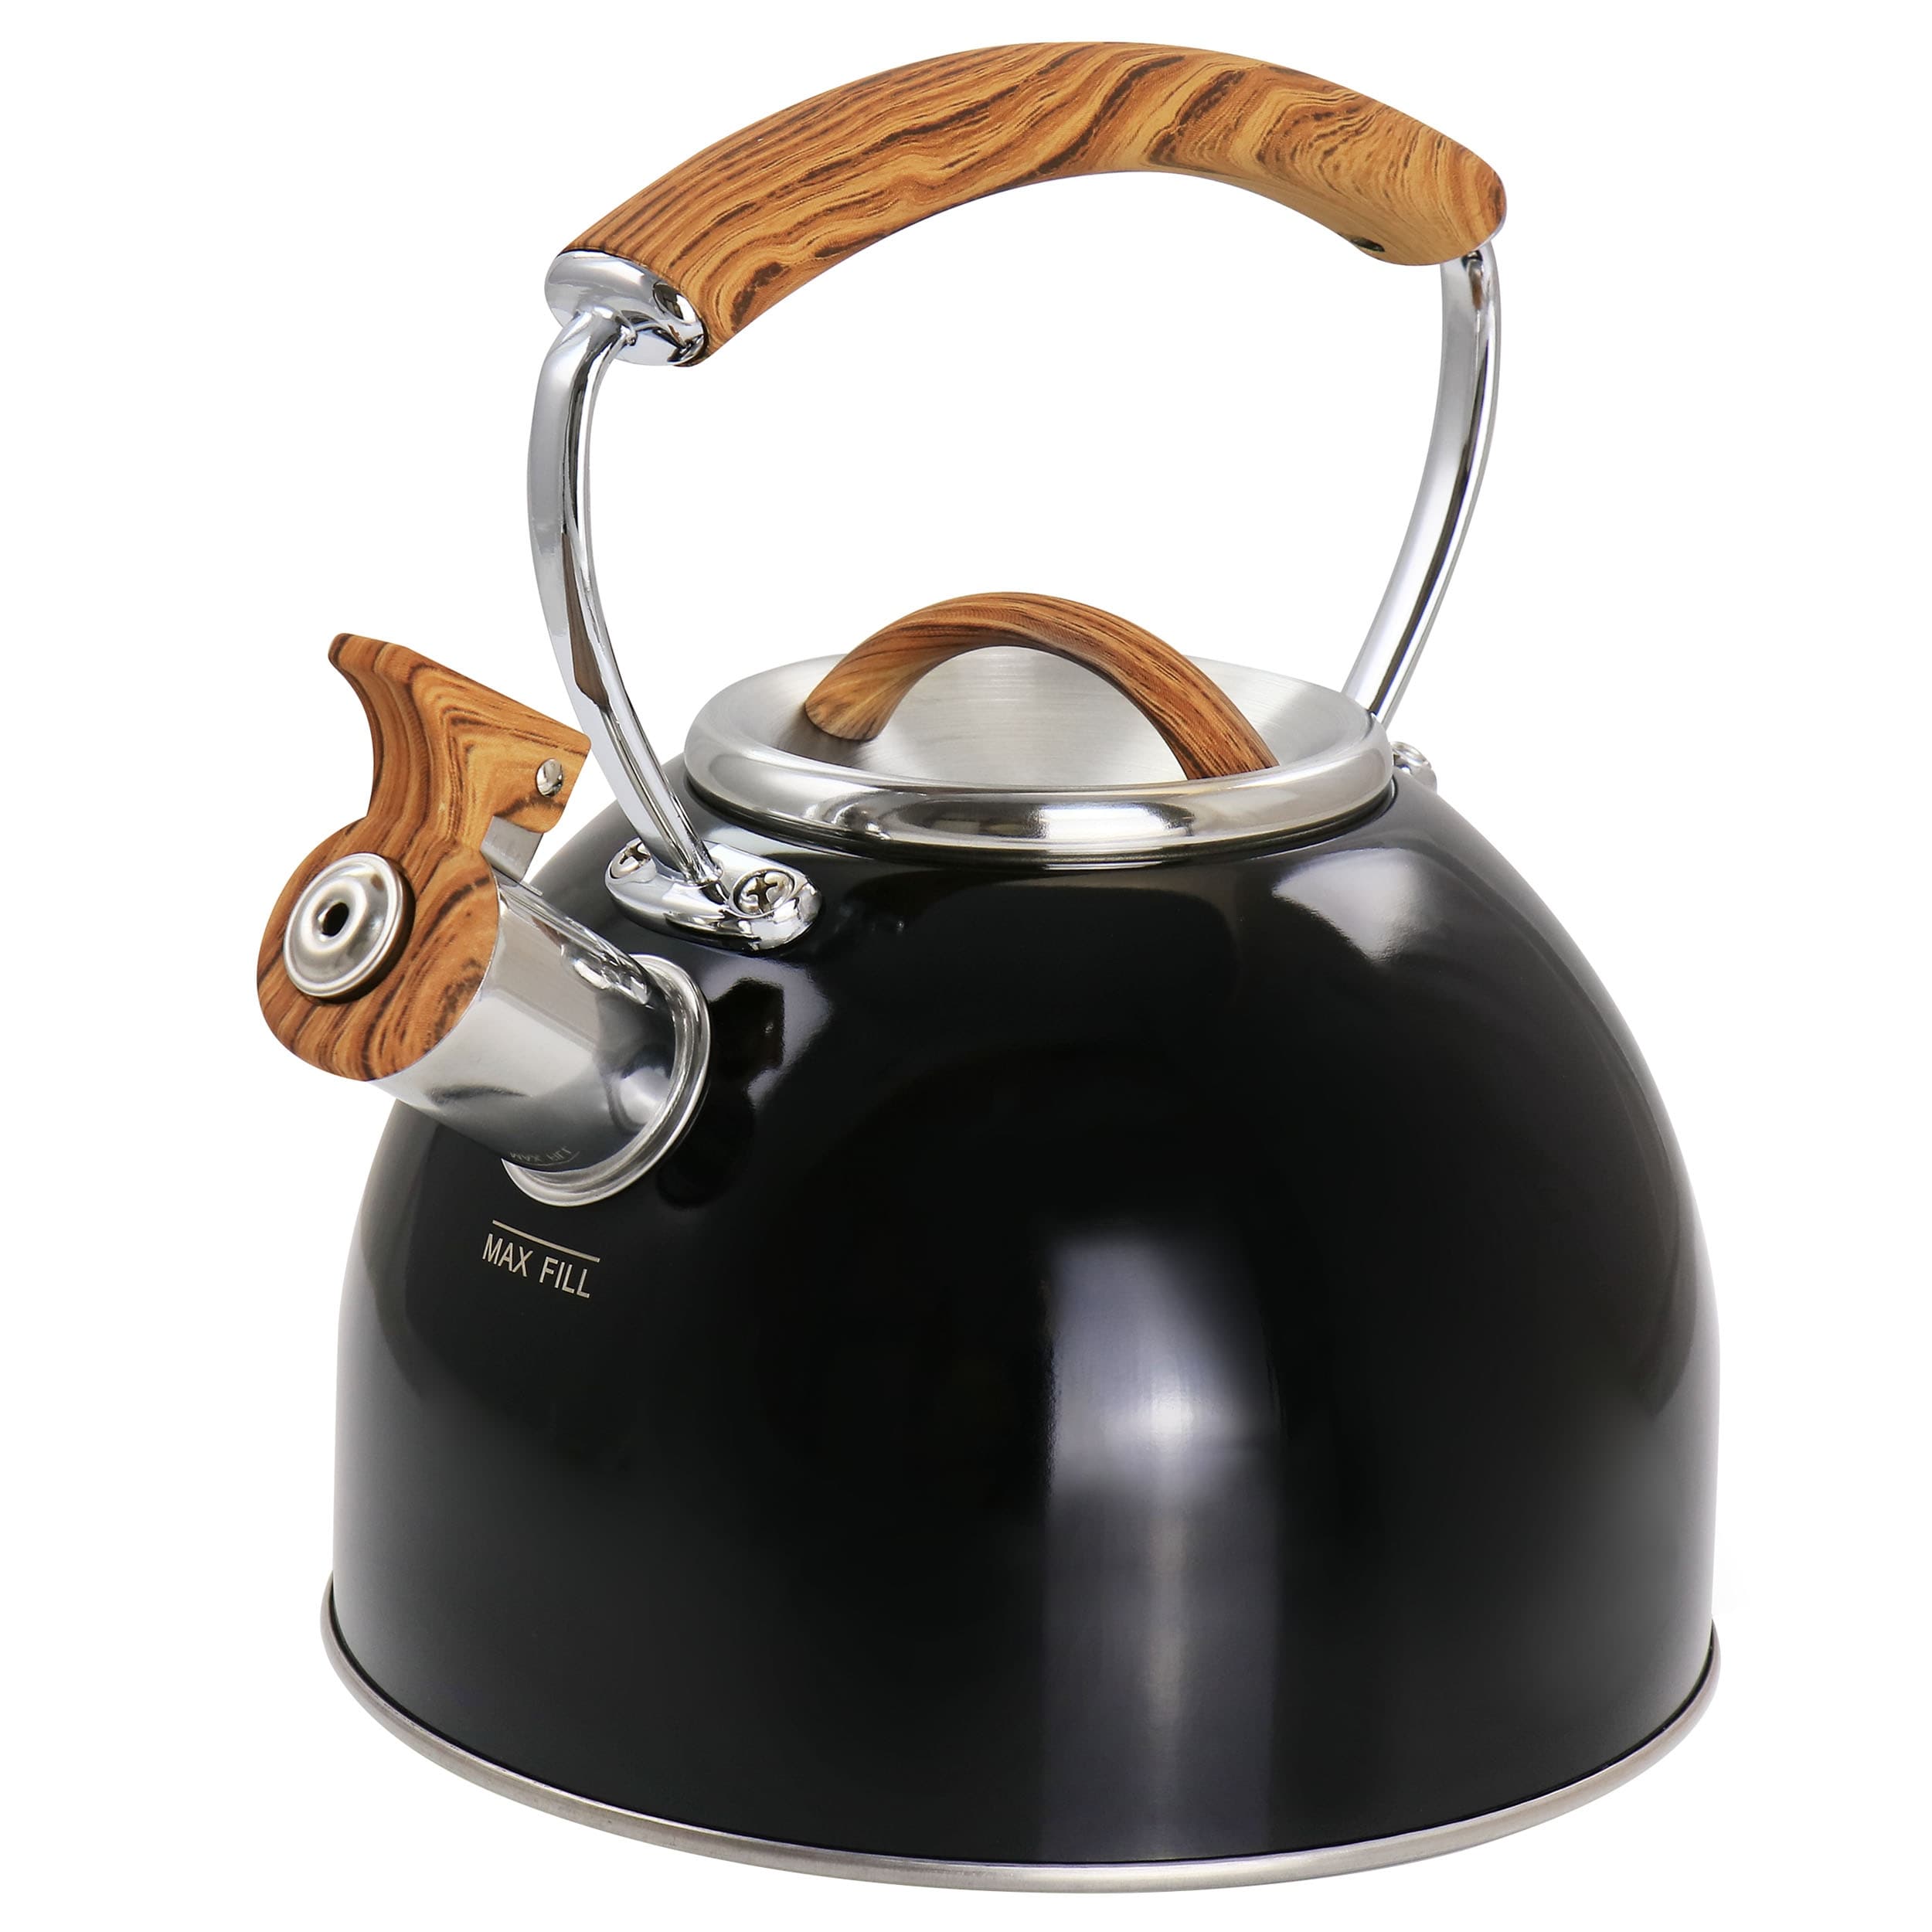 https://ak1.ostkcdn.com/images/products/is/images/direct/b8c8dcd6e0c5b2dabcce0a09cbd75265929d8cbb/Mr.Coffee-2Qt.-Stainless-Steel-Whistling-Tea-Kettle.jpg